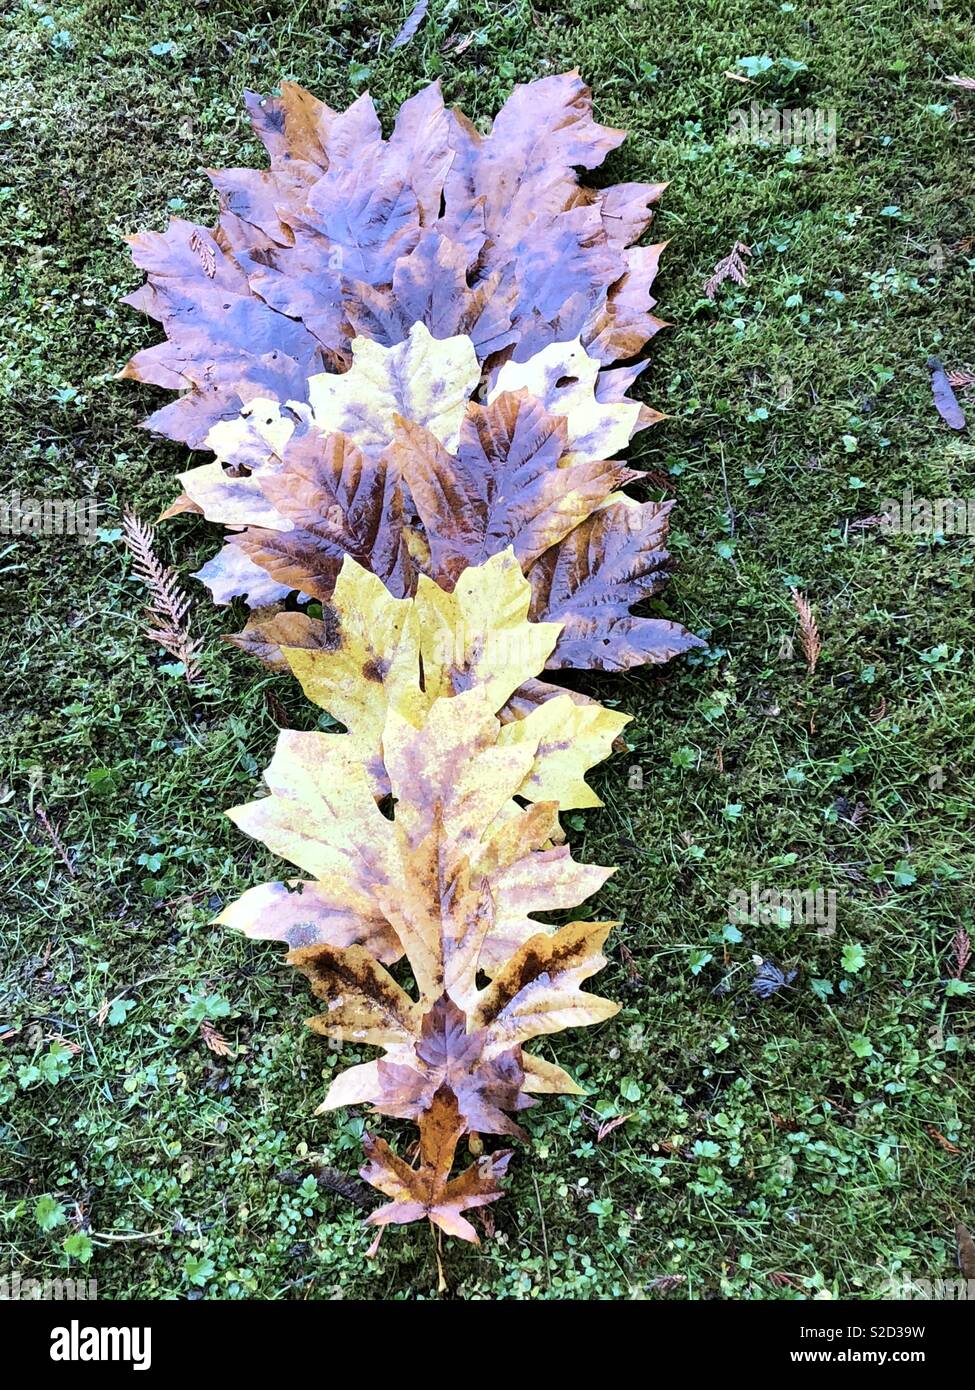 Layers of sized Maple leaves, Stock Photo